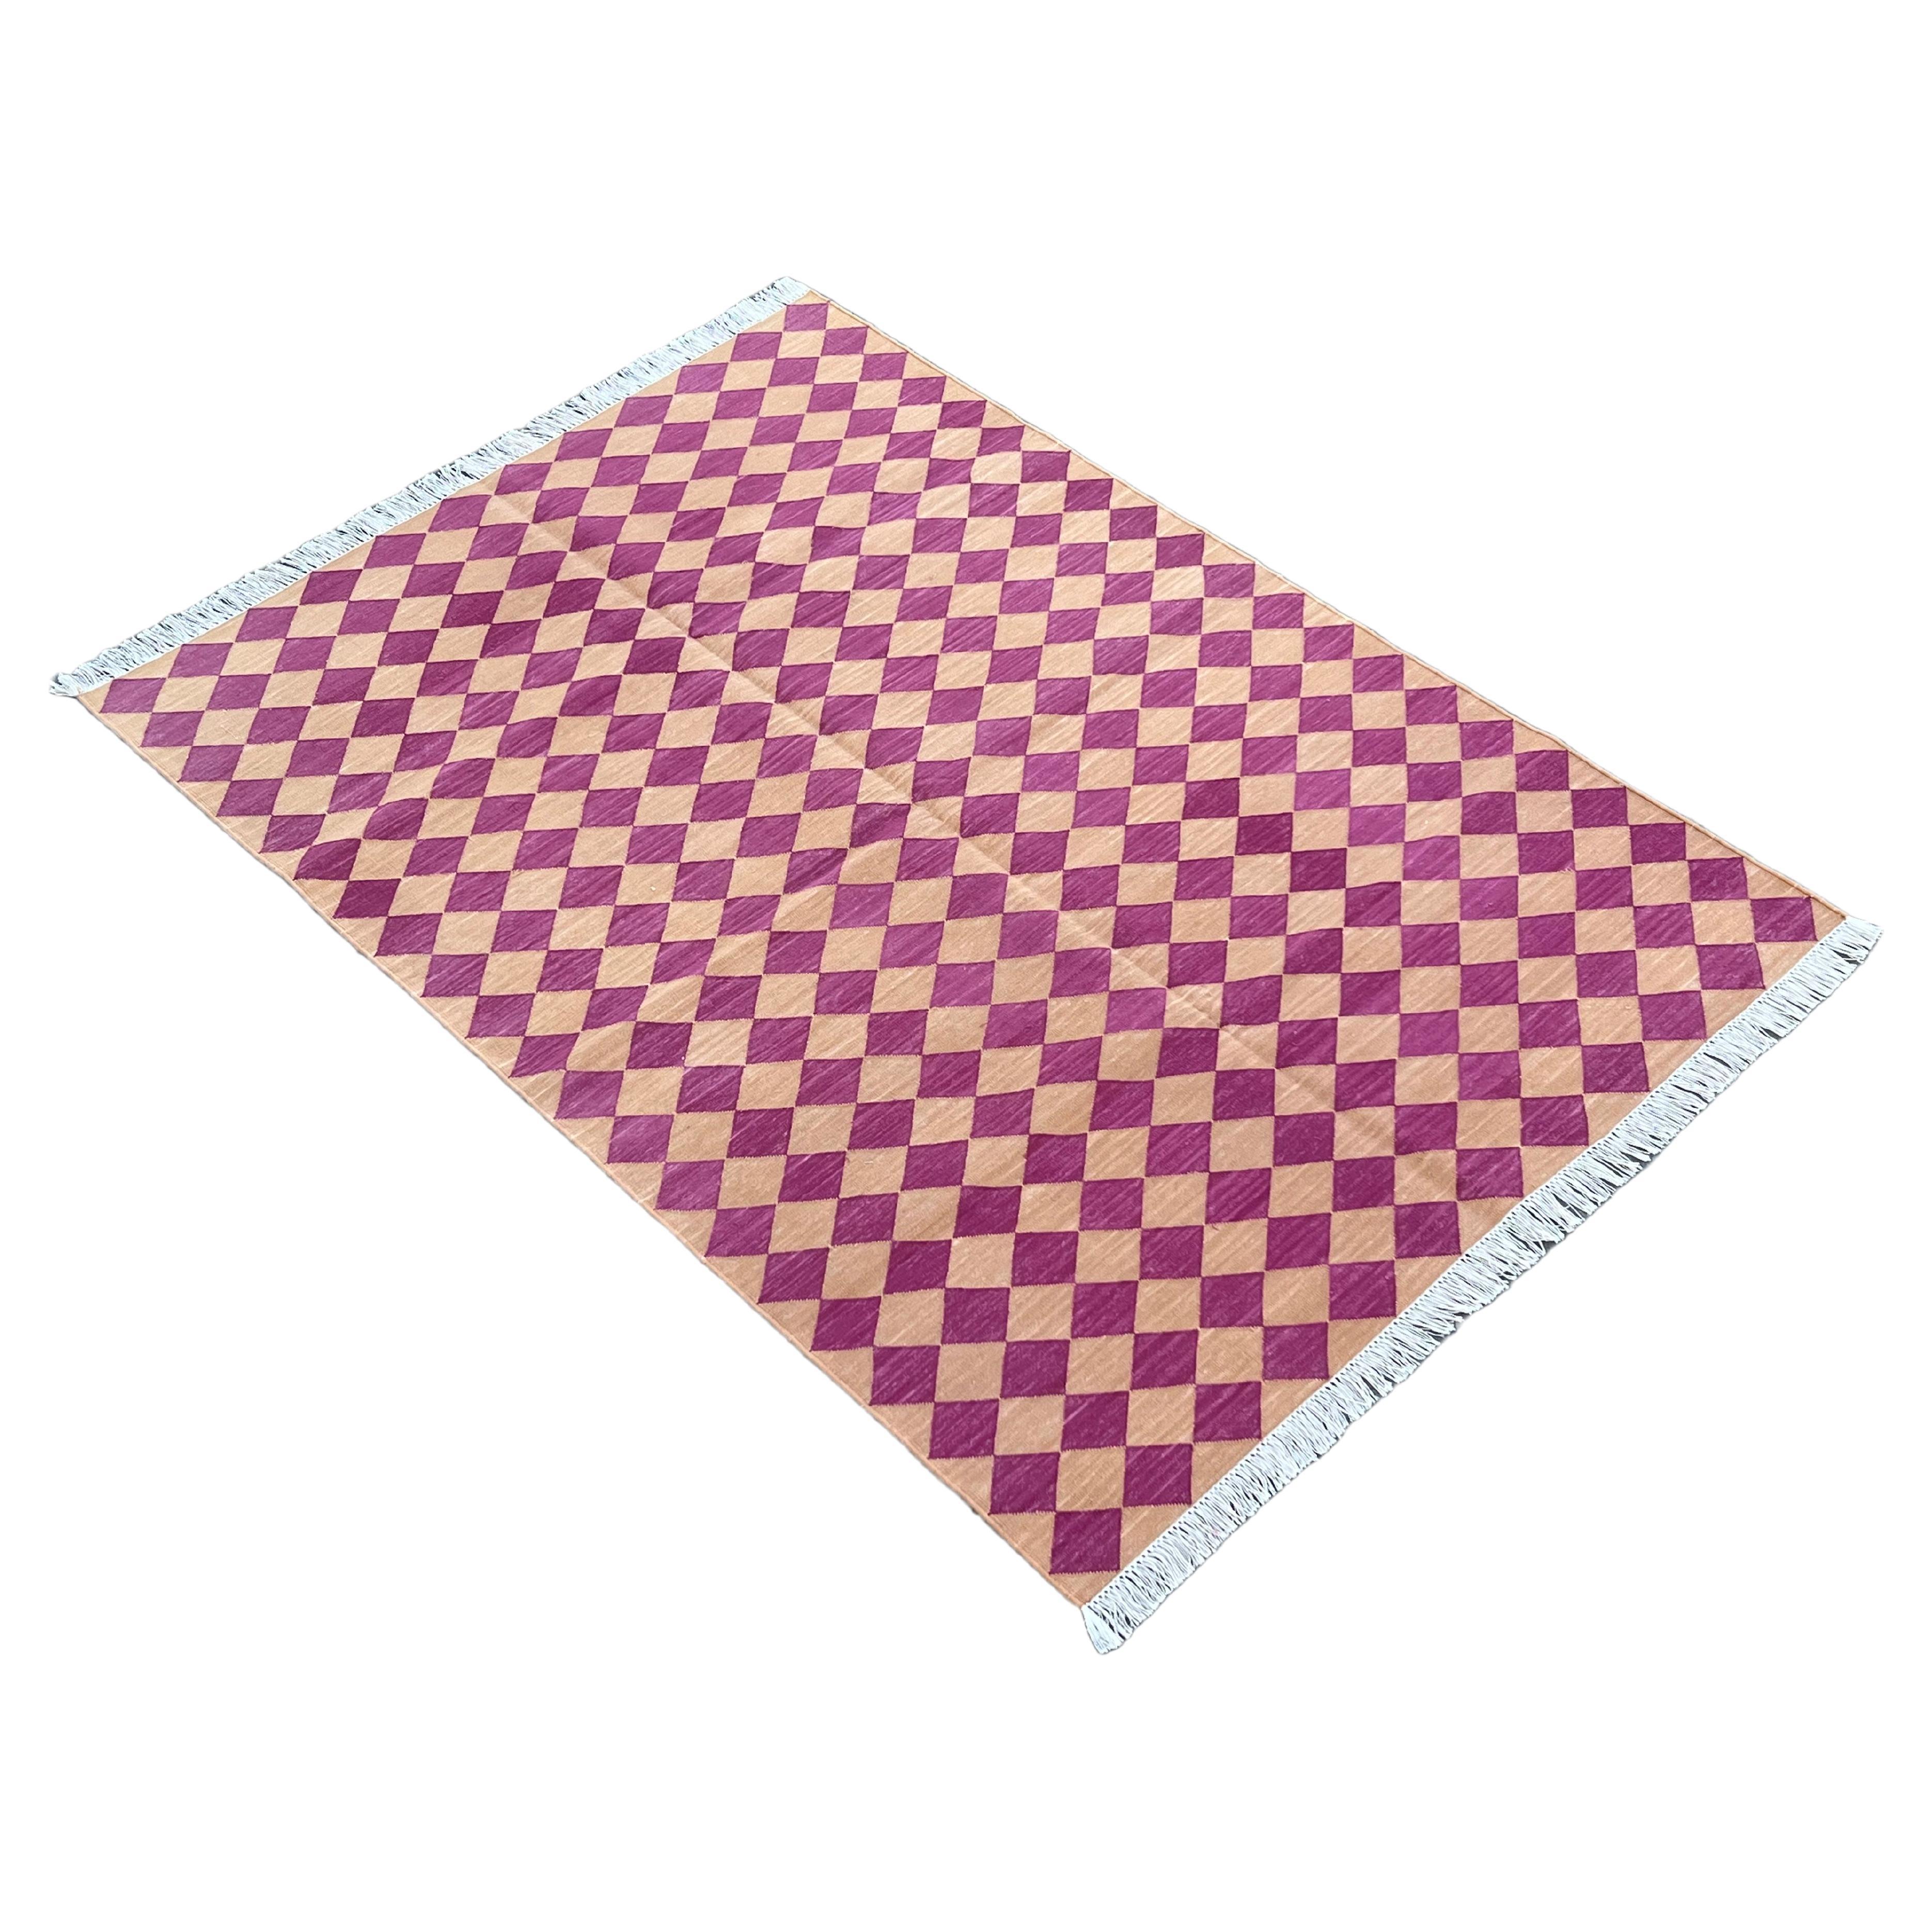 Handmade Cotton Area Flat Weave Rug, 4x6 Pink And Tan Checked Indian Dhurrie Rug For Sale